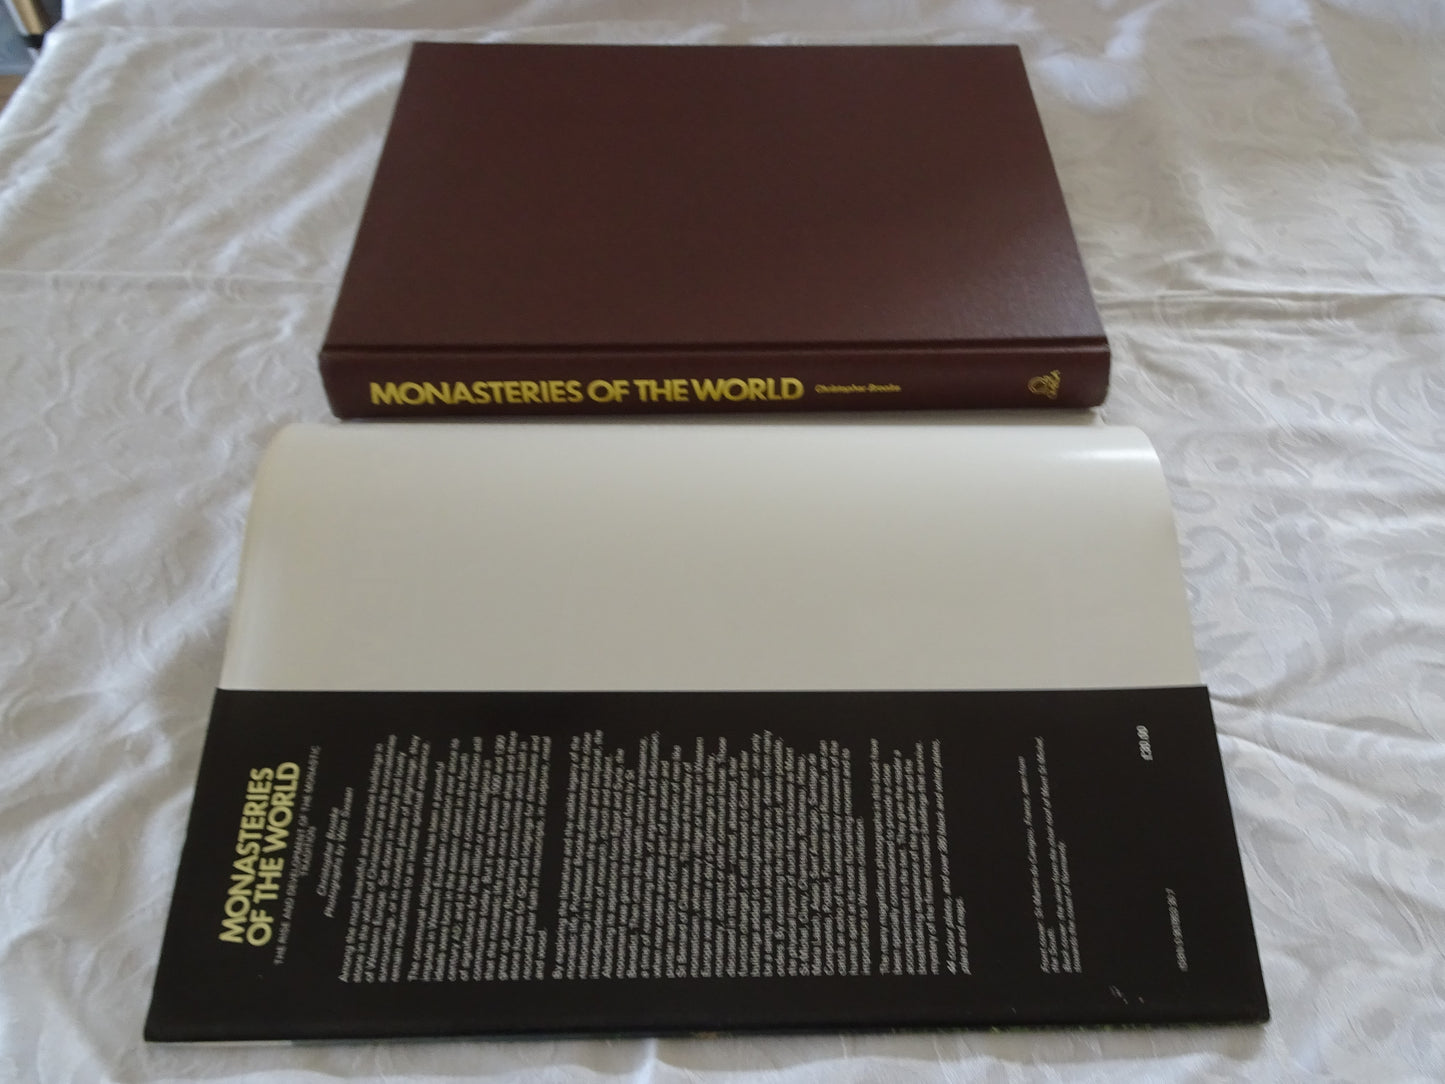 Monasteries of the World by Christopher Brooke